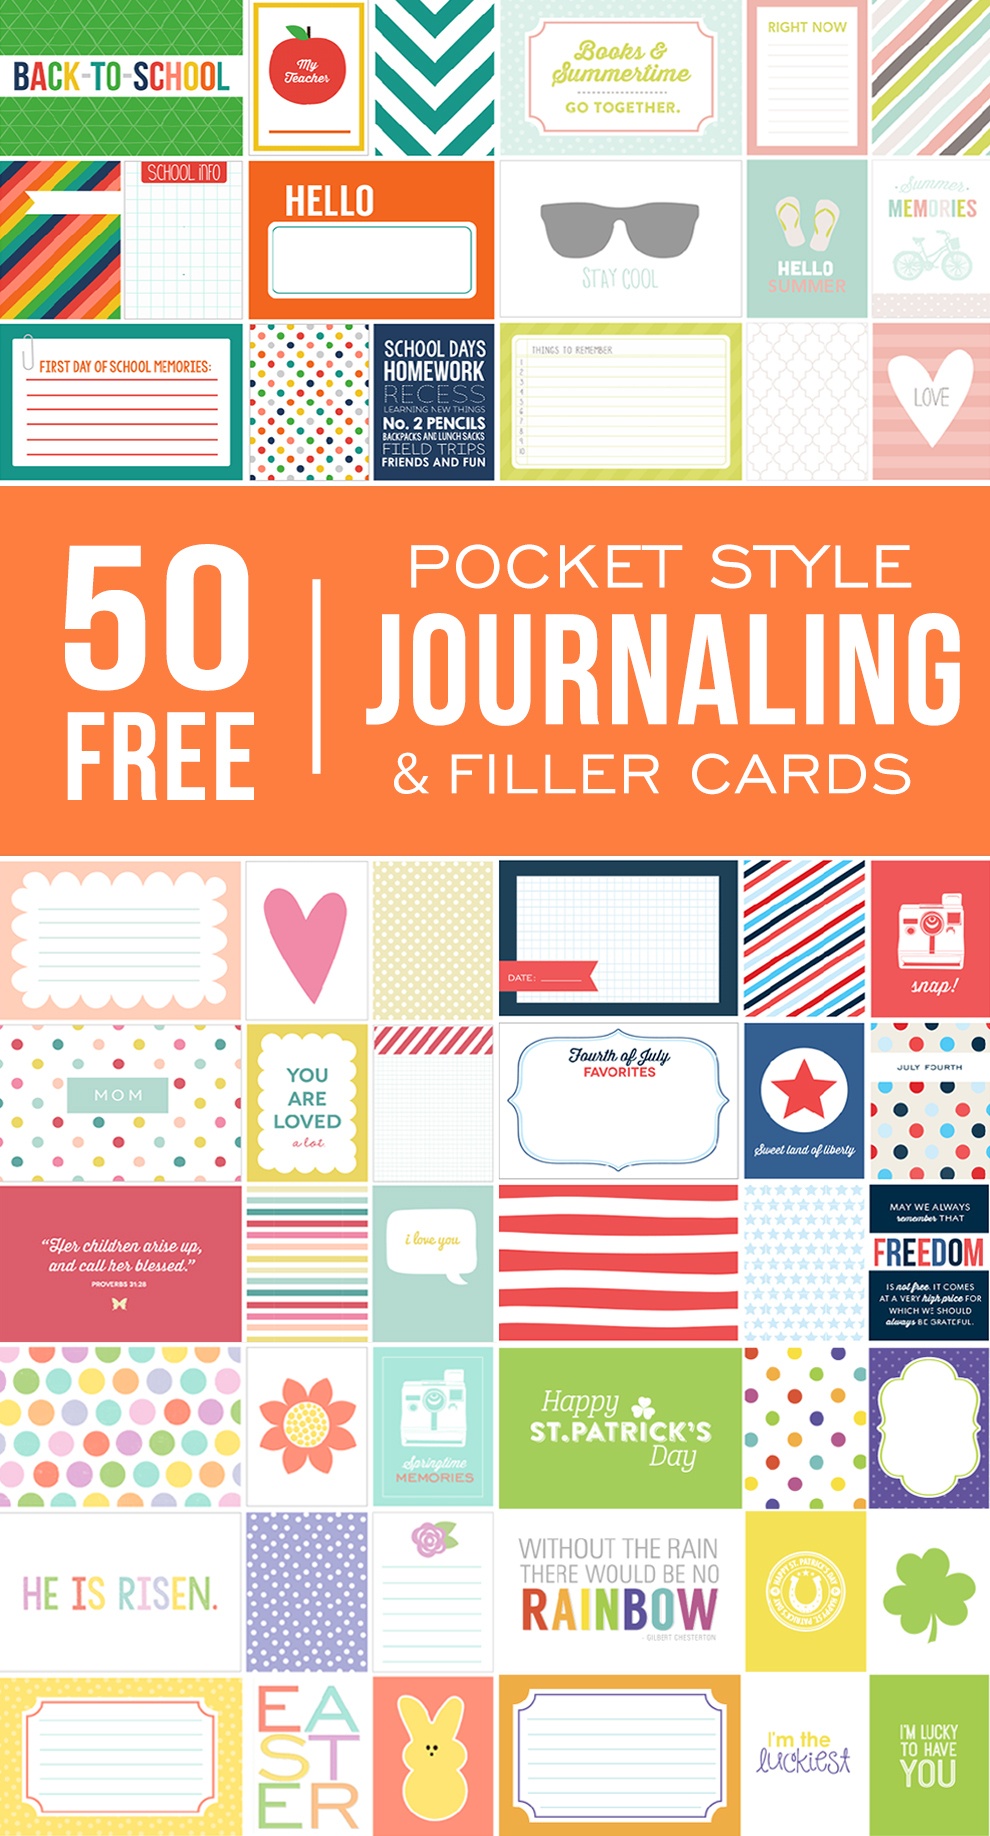 Ultimate Roundup Of Free Journaling + Filler Card Printables - Free Printable Picture Cards